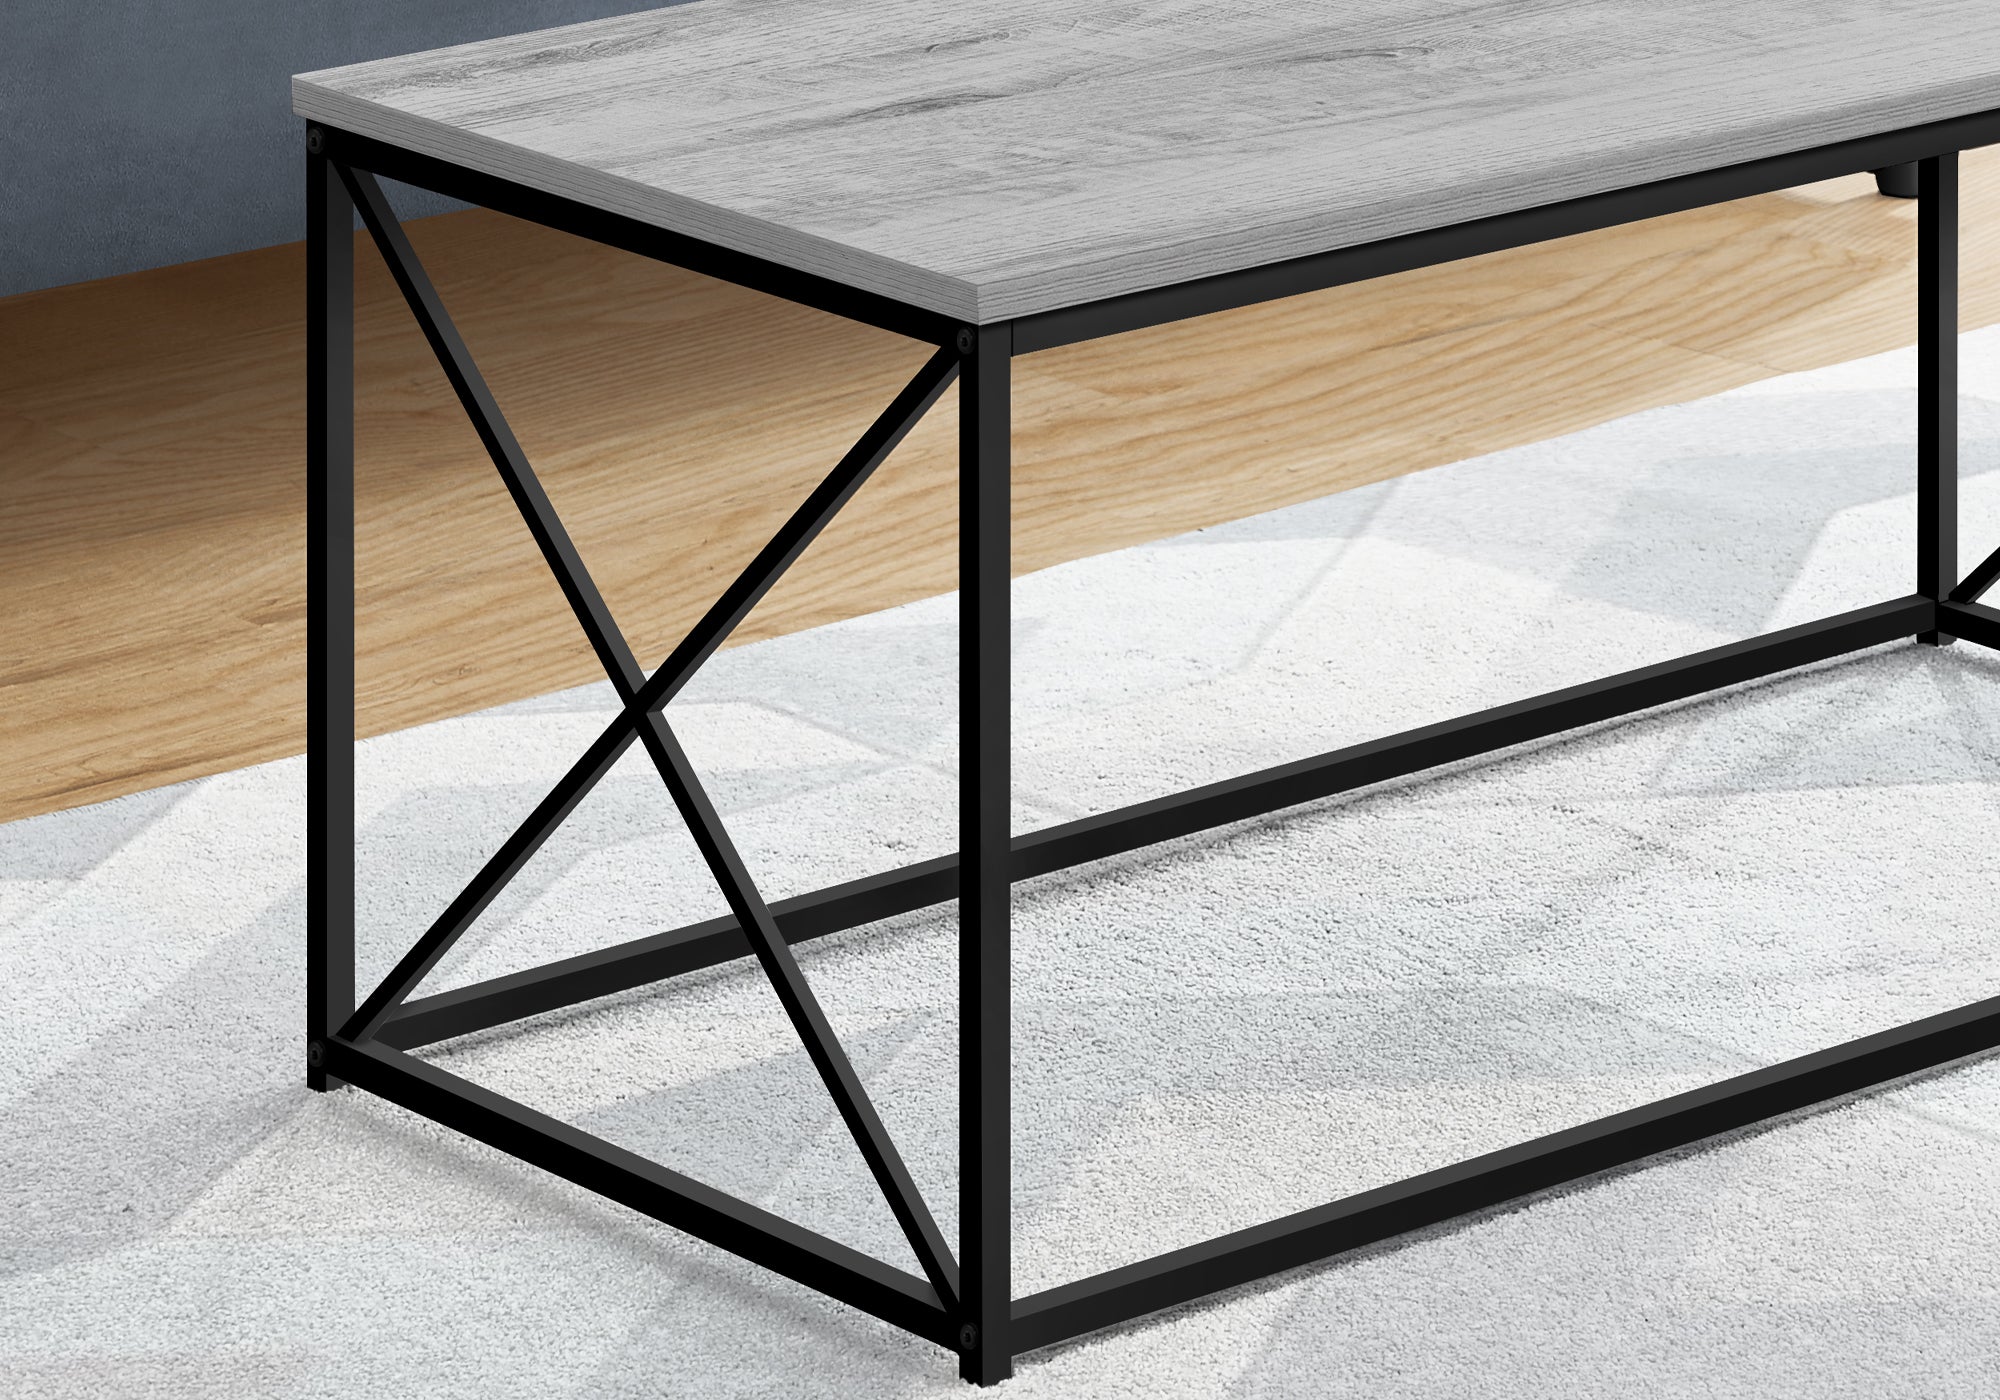 MN-553782    Coffee Table - Rectangular / Metal Base With X-Shaped Sides - 40"L - Grey Wood-Look / Black